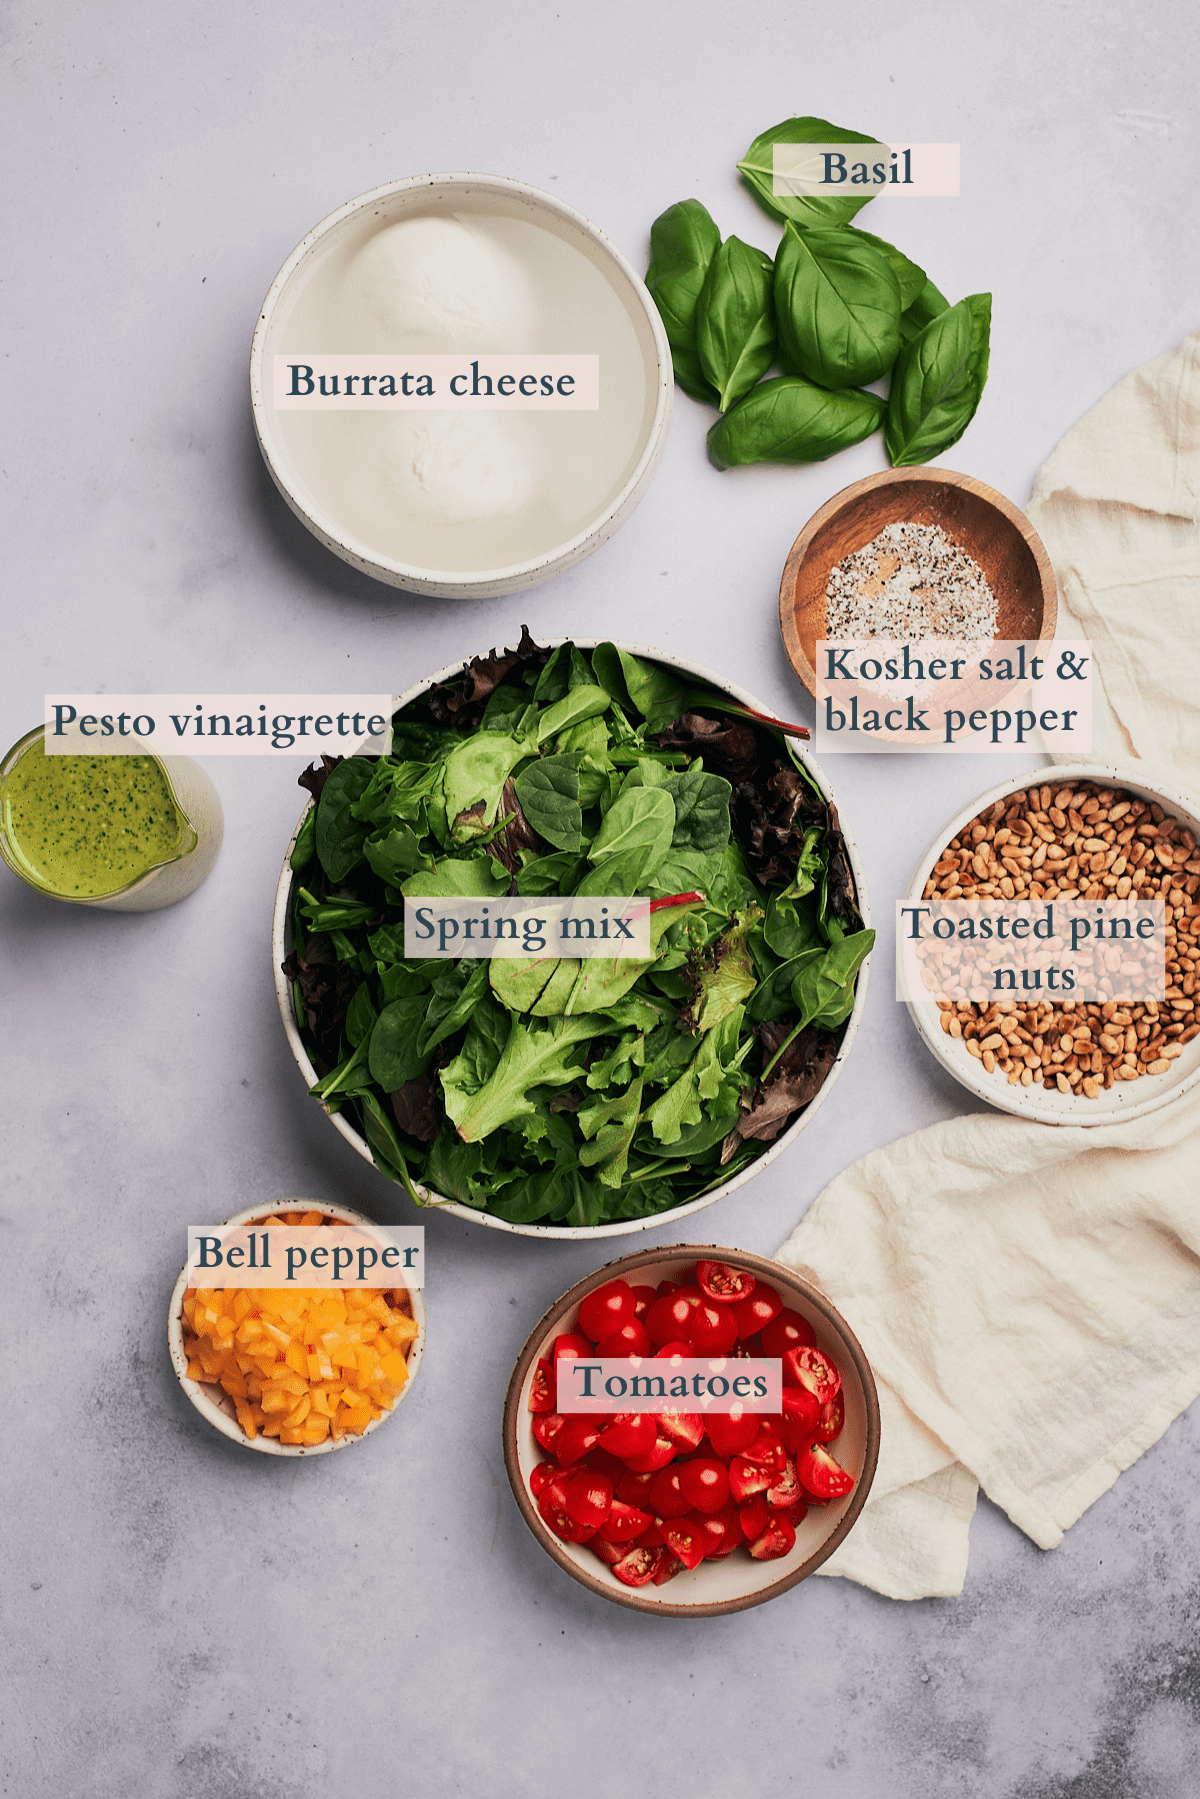 burrata salad ingredients graphic with text to denote ingredients, including tomatoes, spring mix, pesto vinaigrette, toasted pine nuts, bell peppers, basil, burrata cheese, kosher salt and black pepper. 